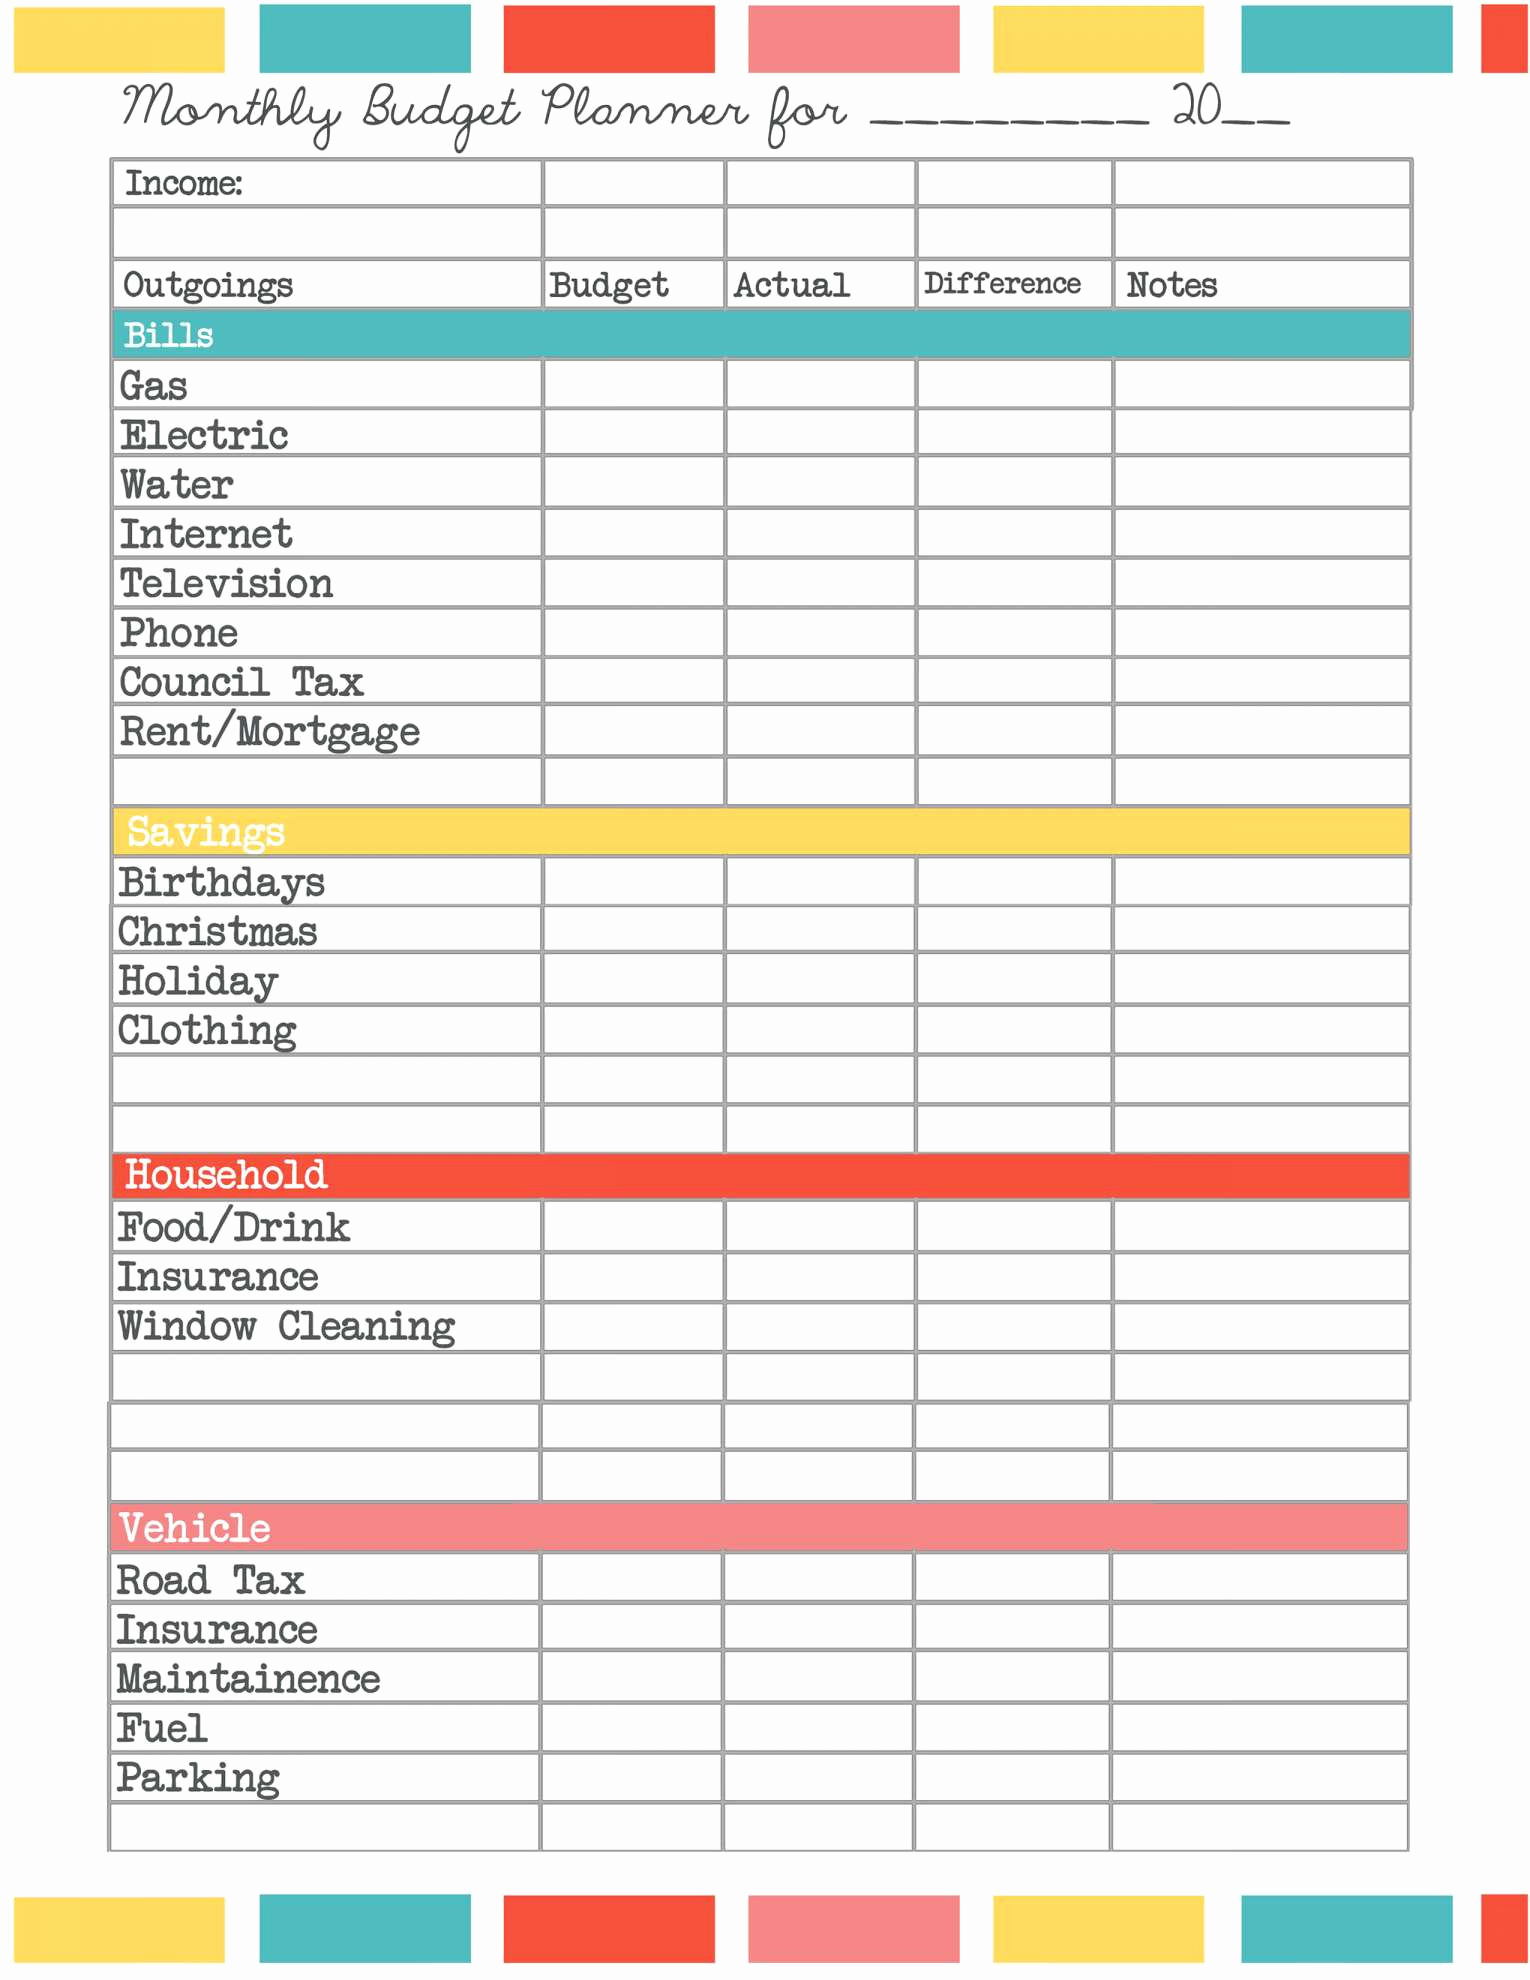 Example of Vacation Rental Spreadsheet within Vacation Rental Spreadsheet in Workshhet